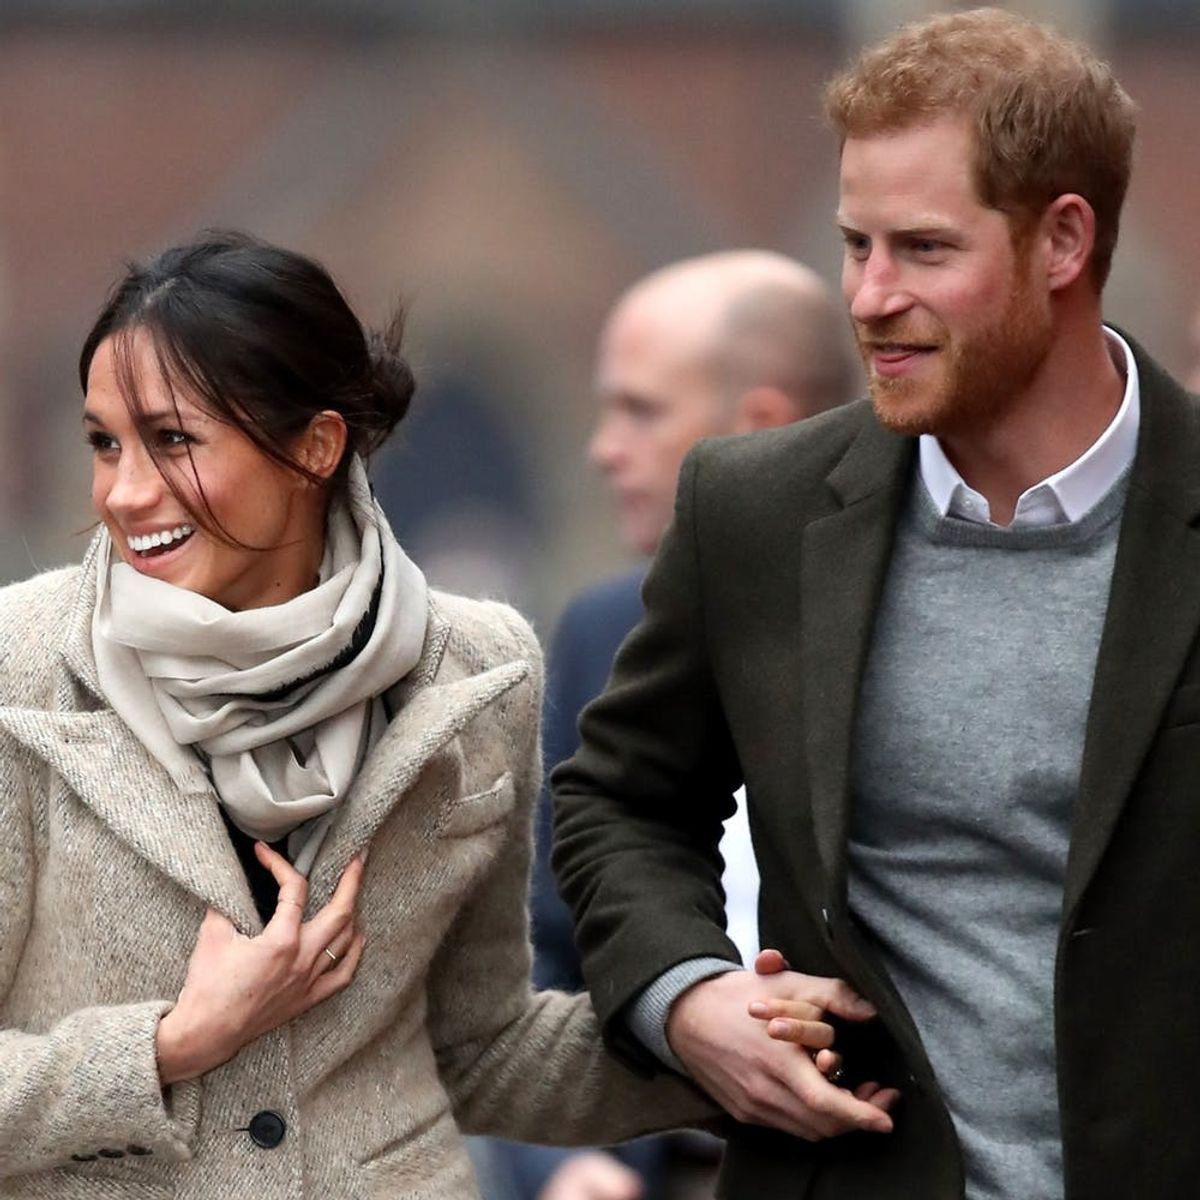 Prince Harry and Meghan Markle Are All Smiles at Their First Royal Engagement of 2018